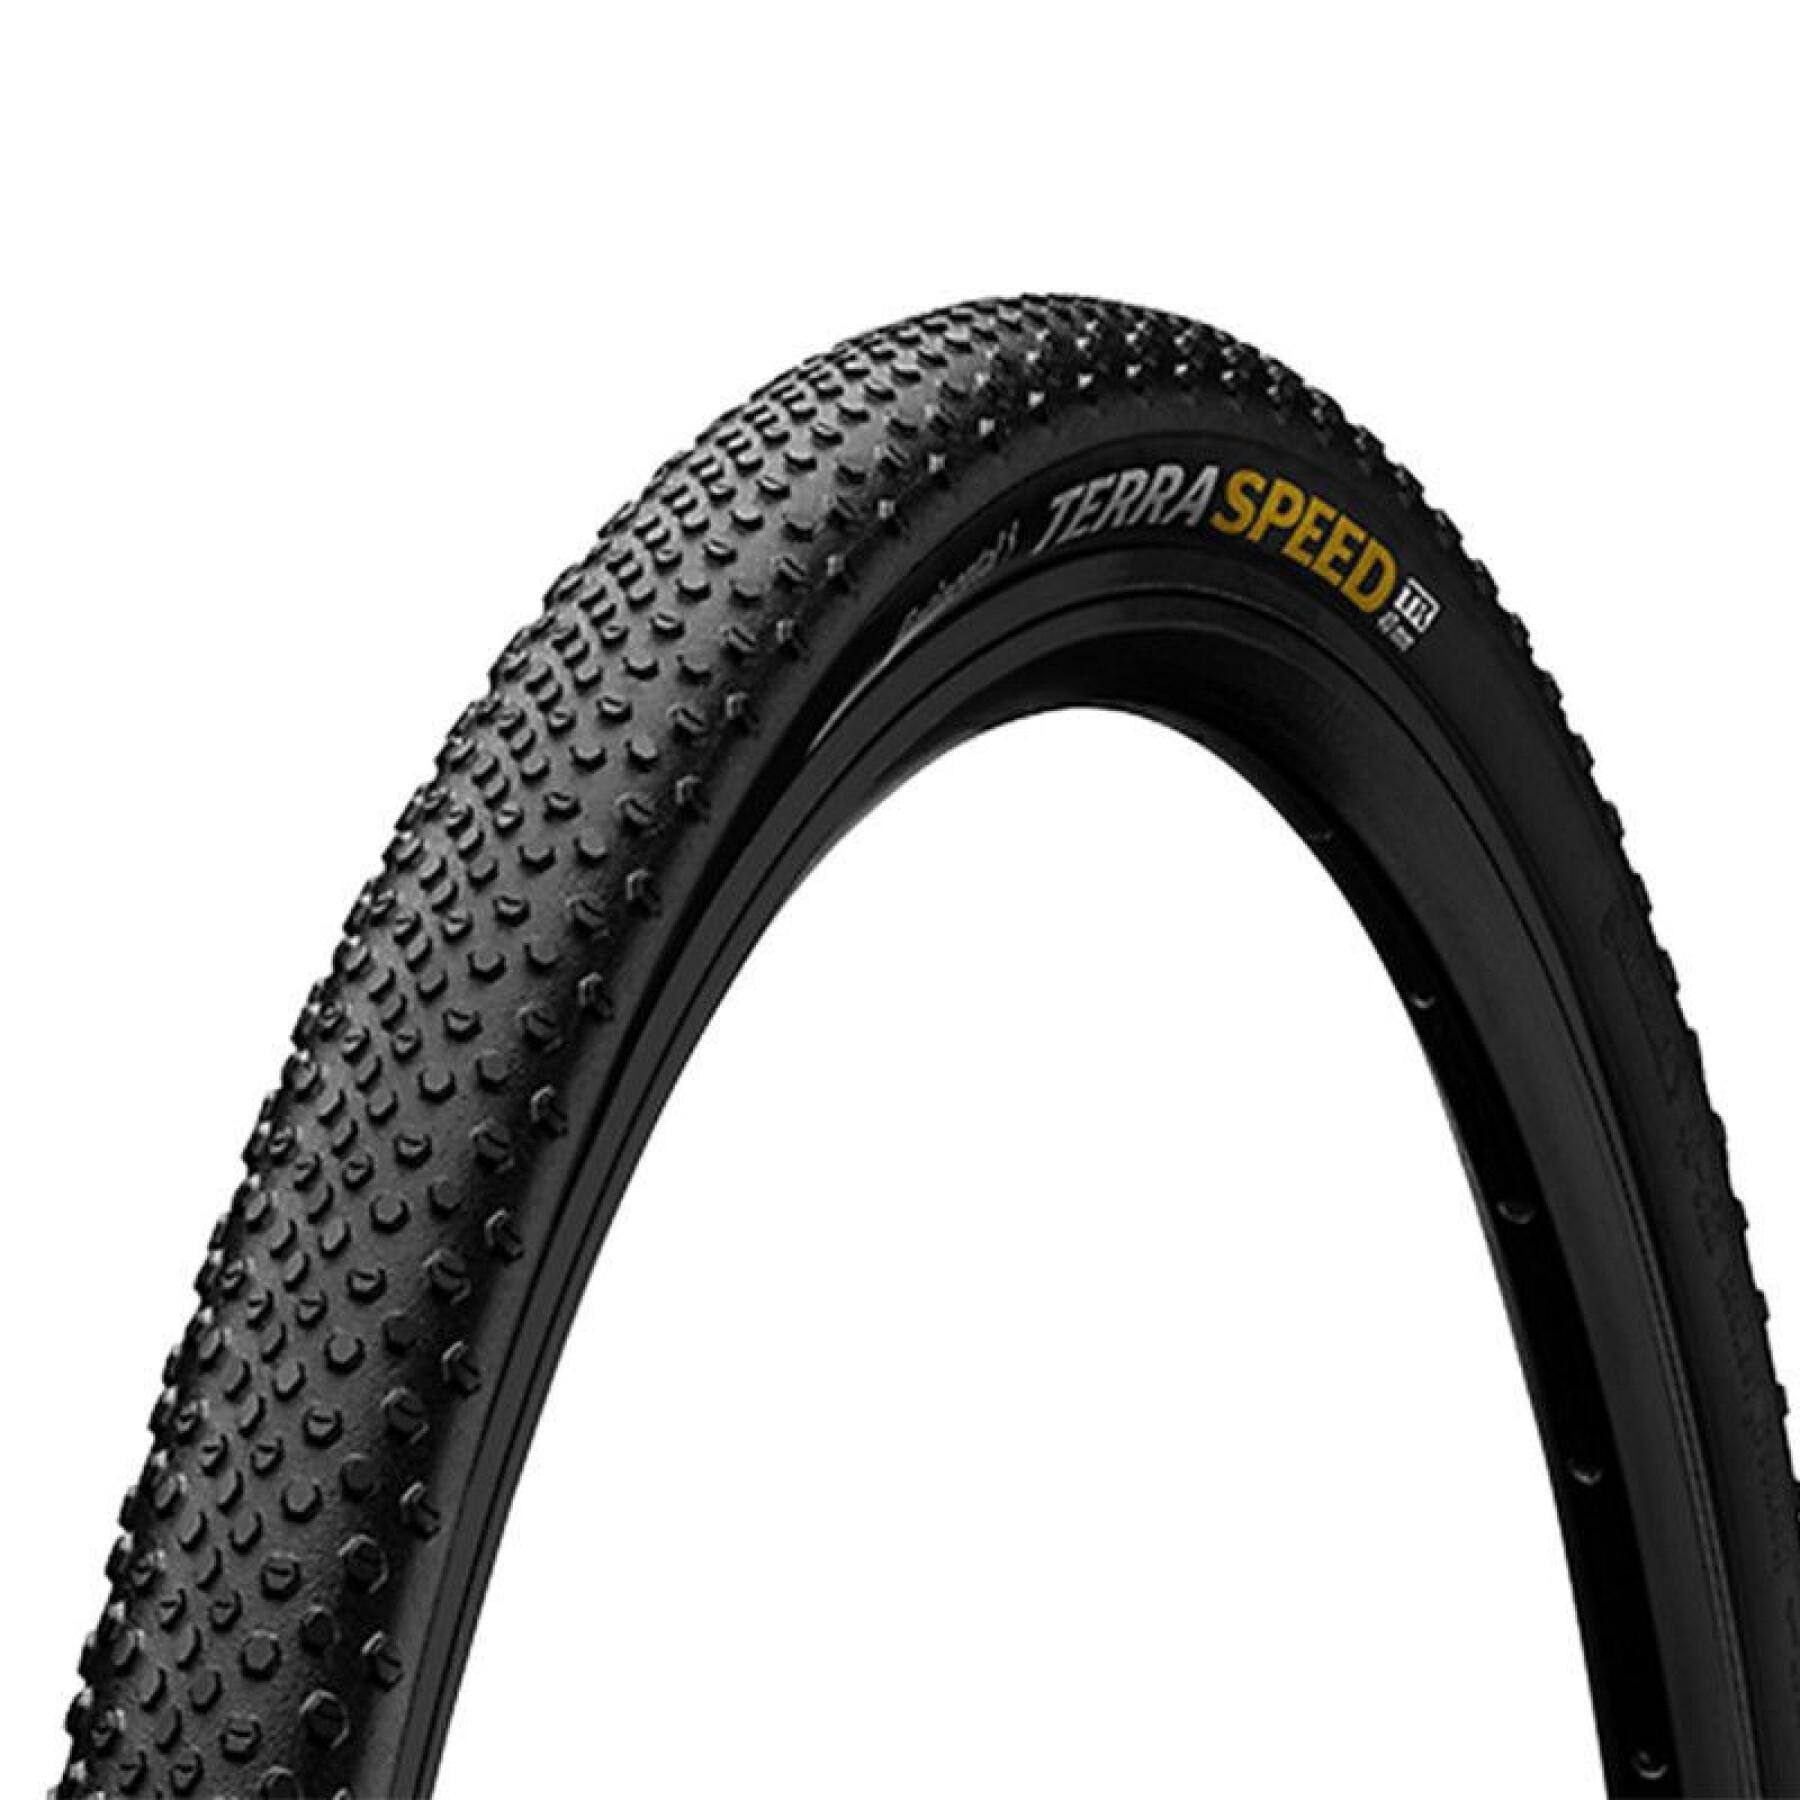 Tire gravel protection Continental Terra Speed Tubetype-Tubeless Ts (35-622)